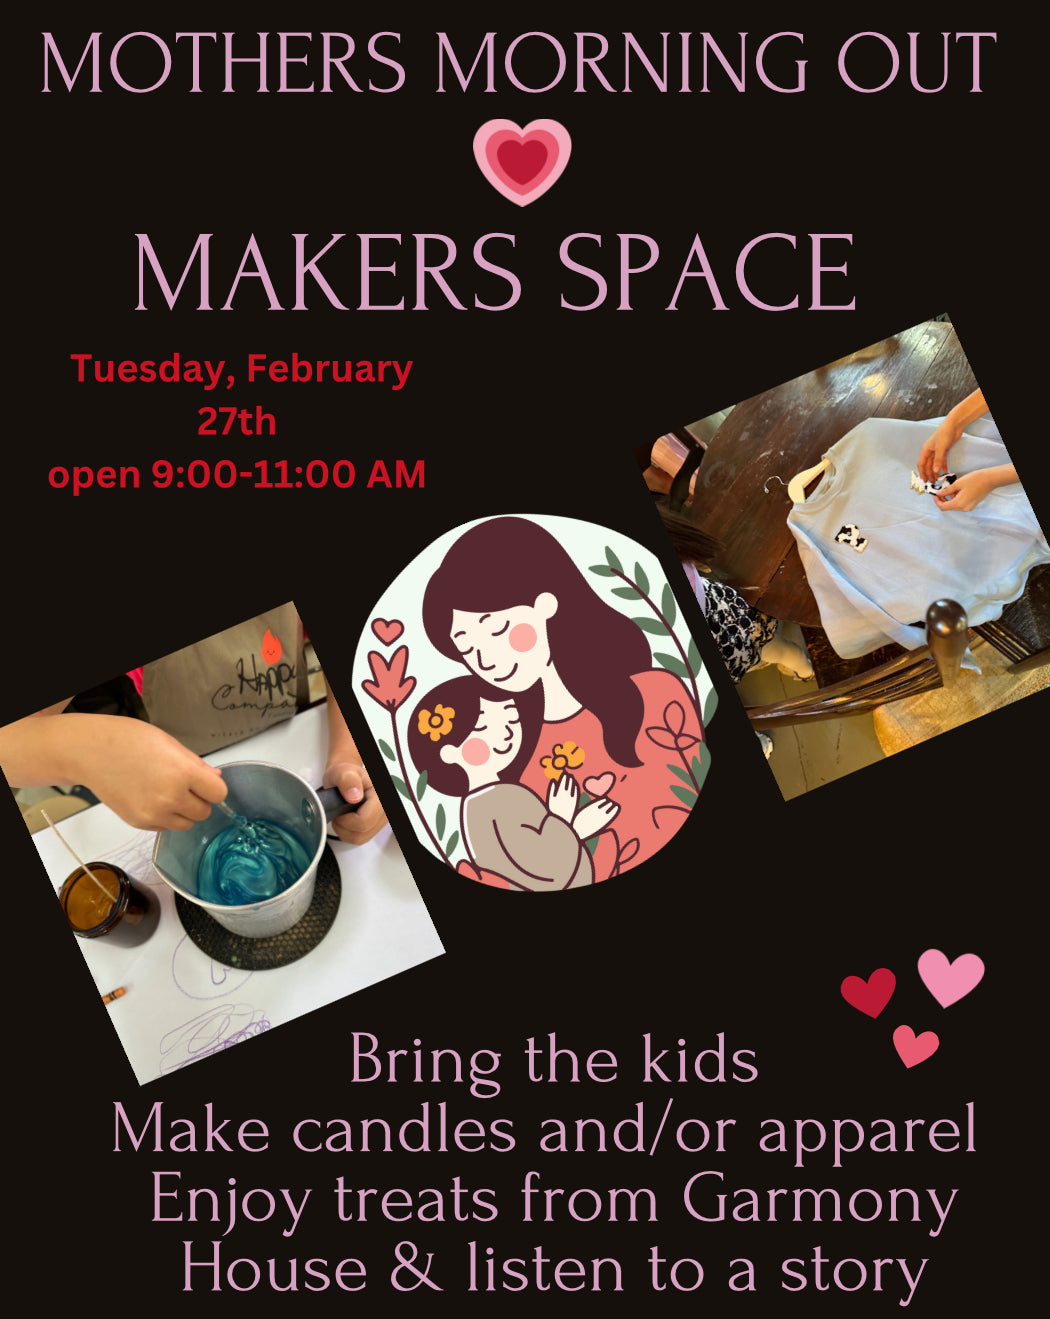 Makers Space (Candle Making &/or Apparel Making) (Tuesday Morning Out) on Monday 2/27